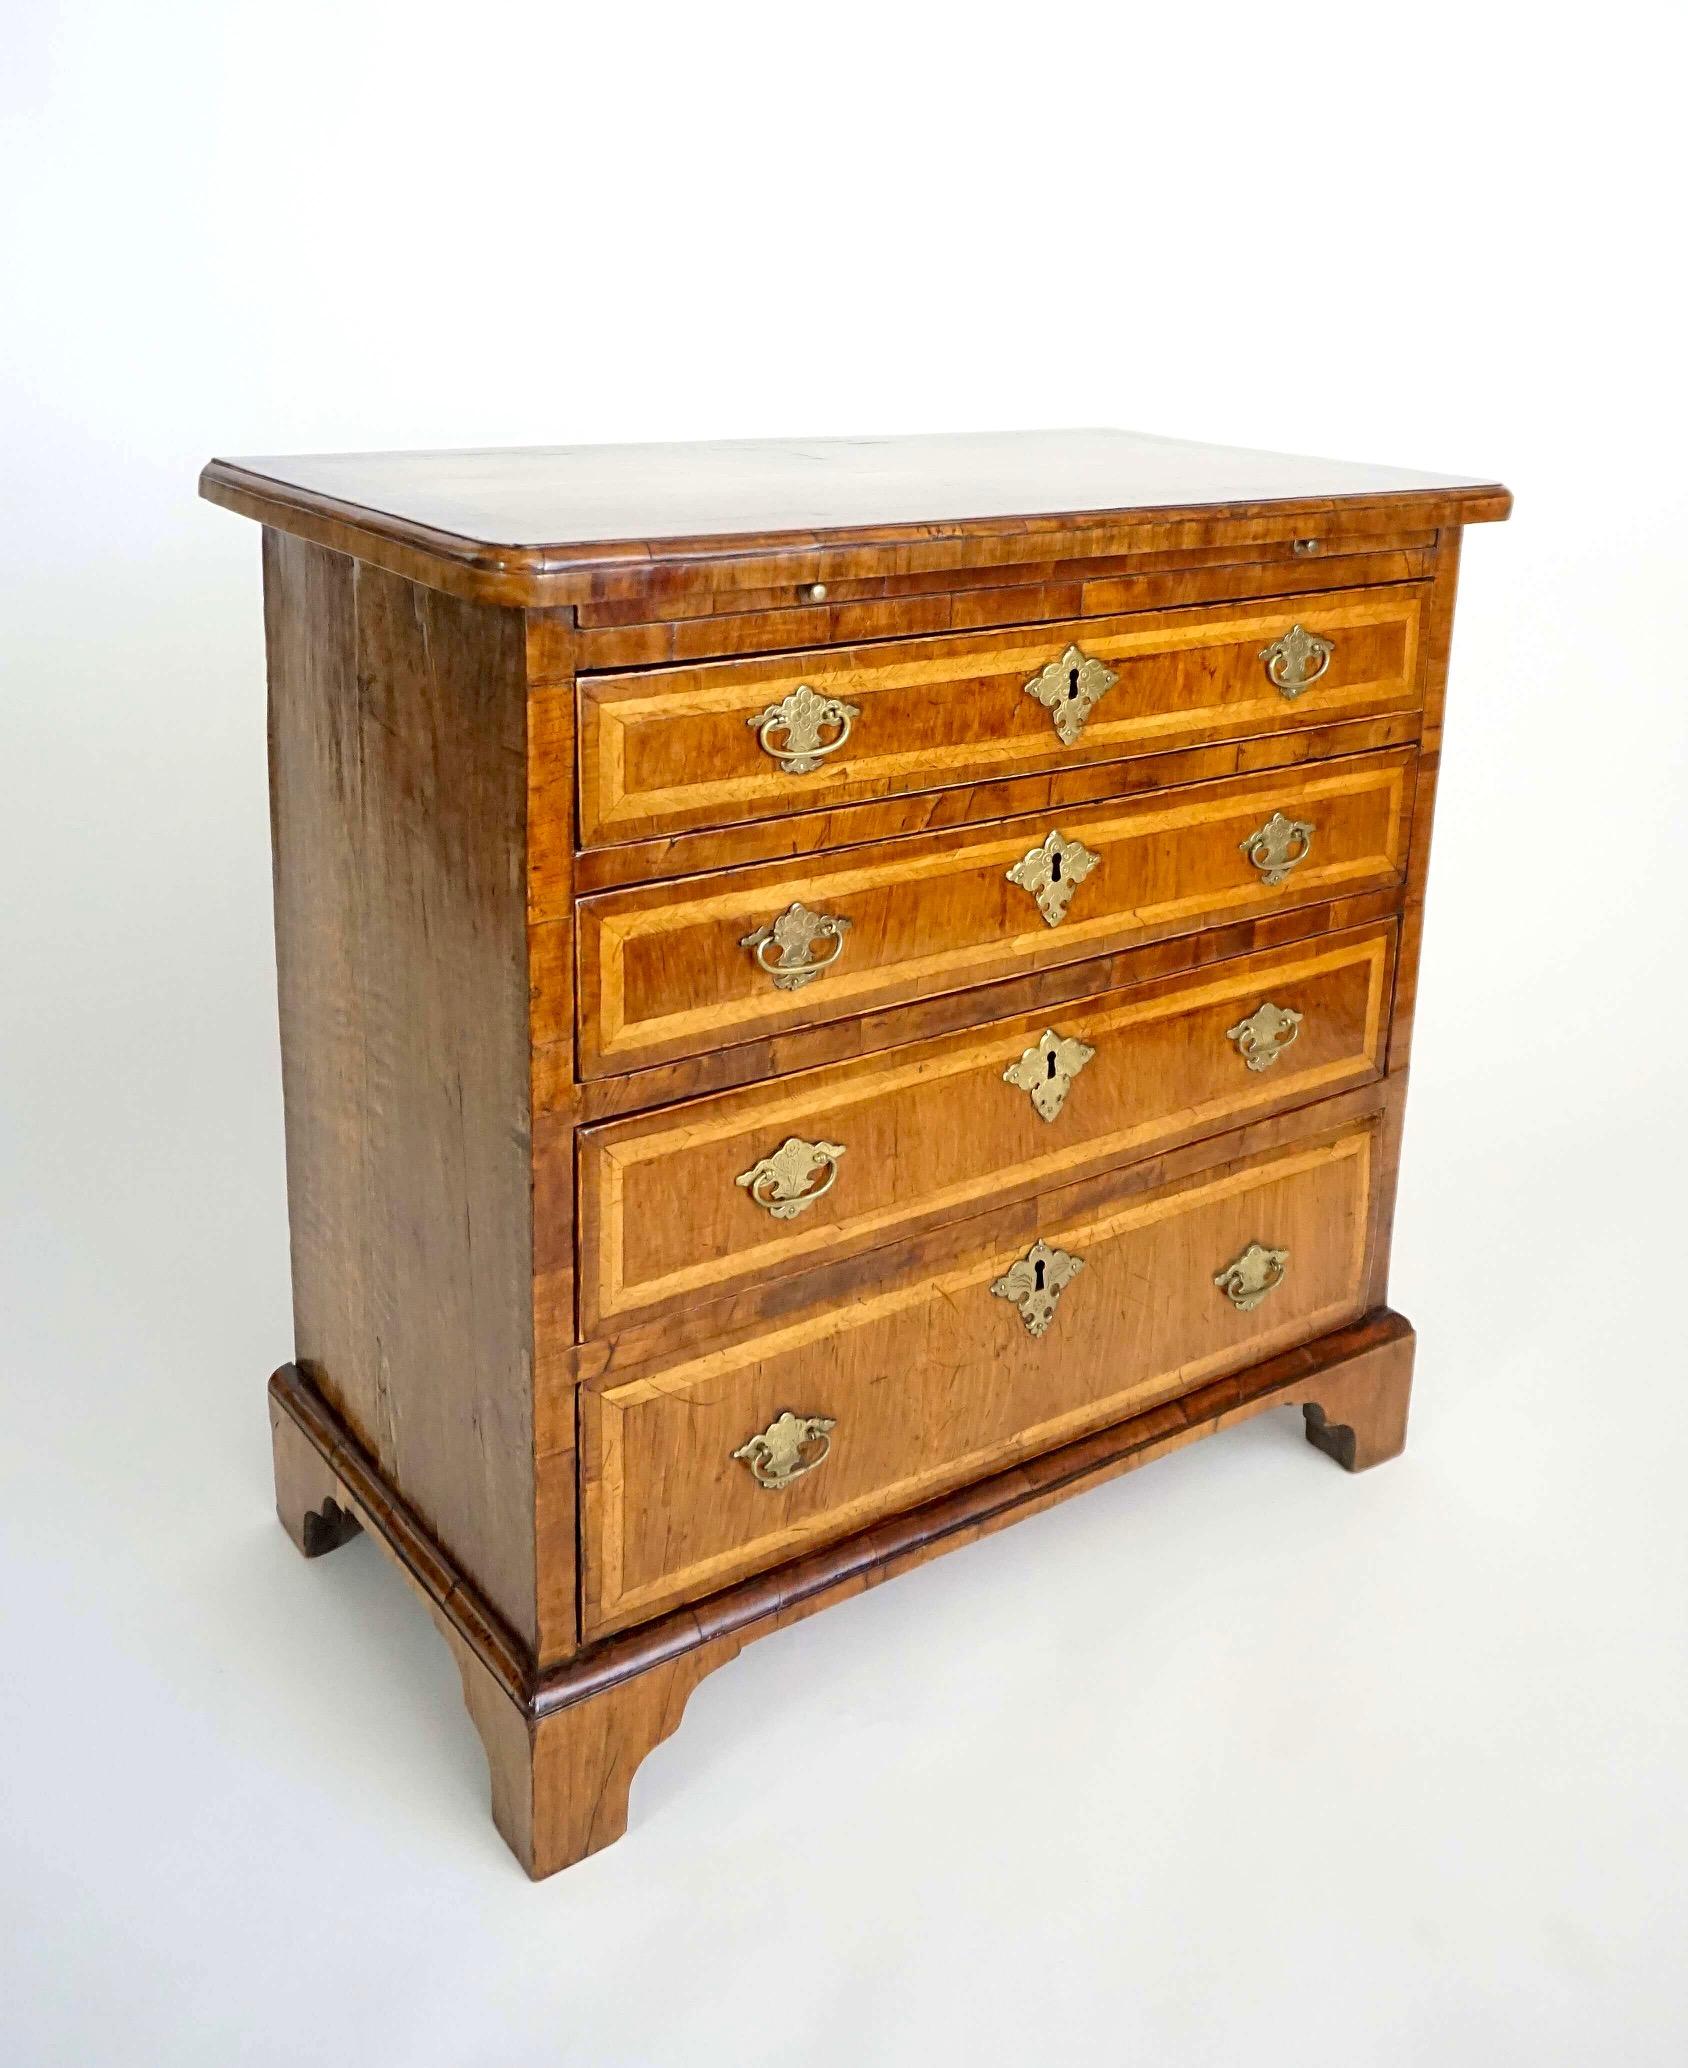 Queen Anne English Walnut and Satinwood Inlaid Petite Chest or Bachelor's Chest, circa 1715 For Sale